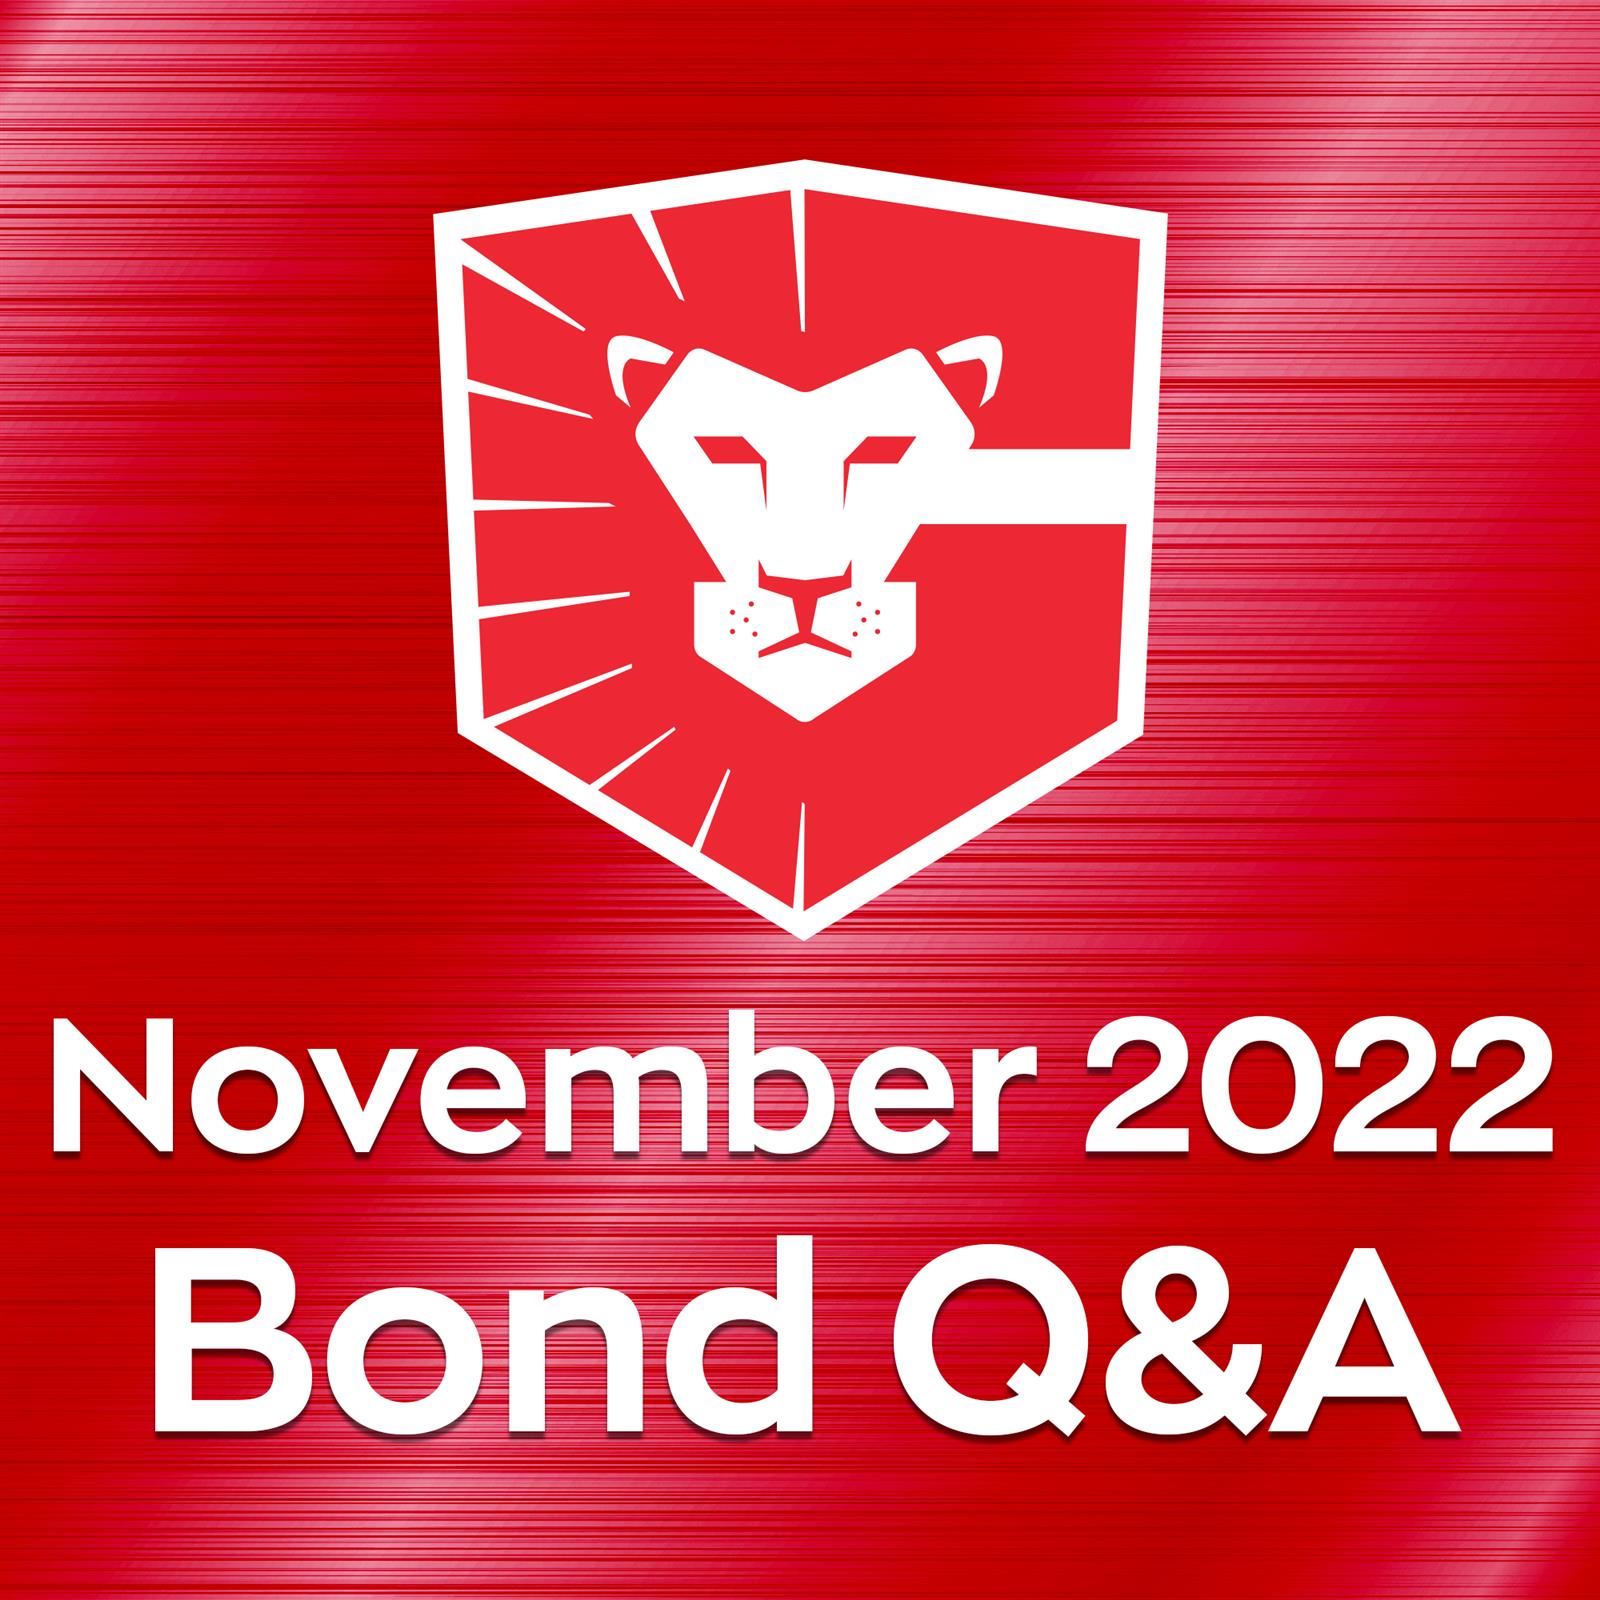 We're updating the bond Q&A, incorporating community feedback